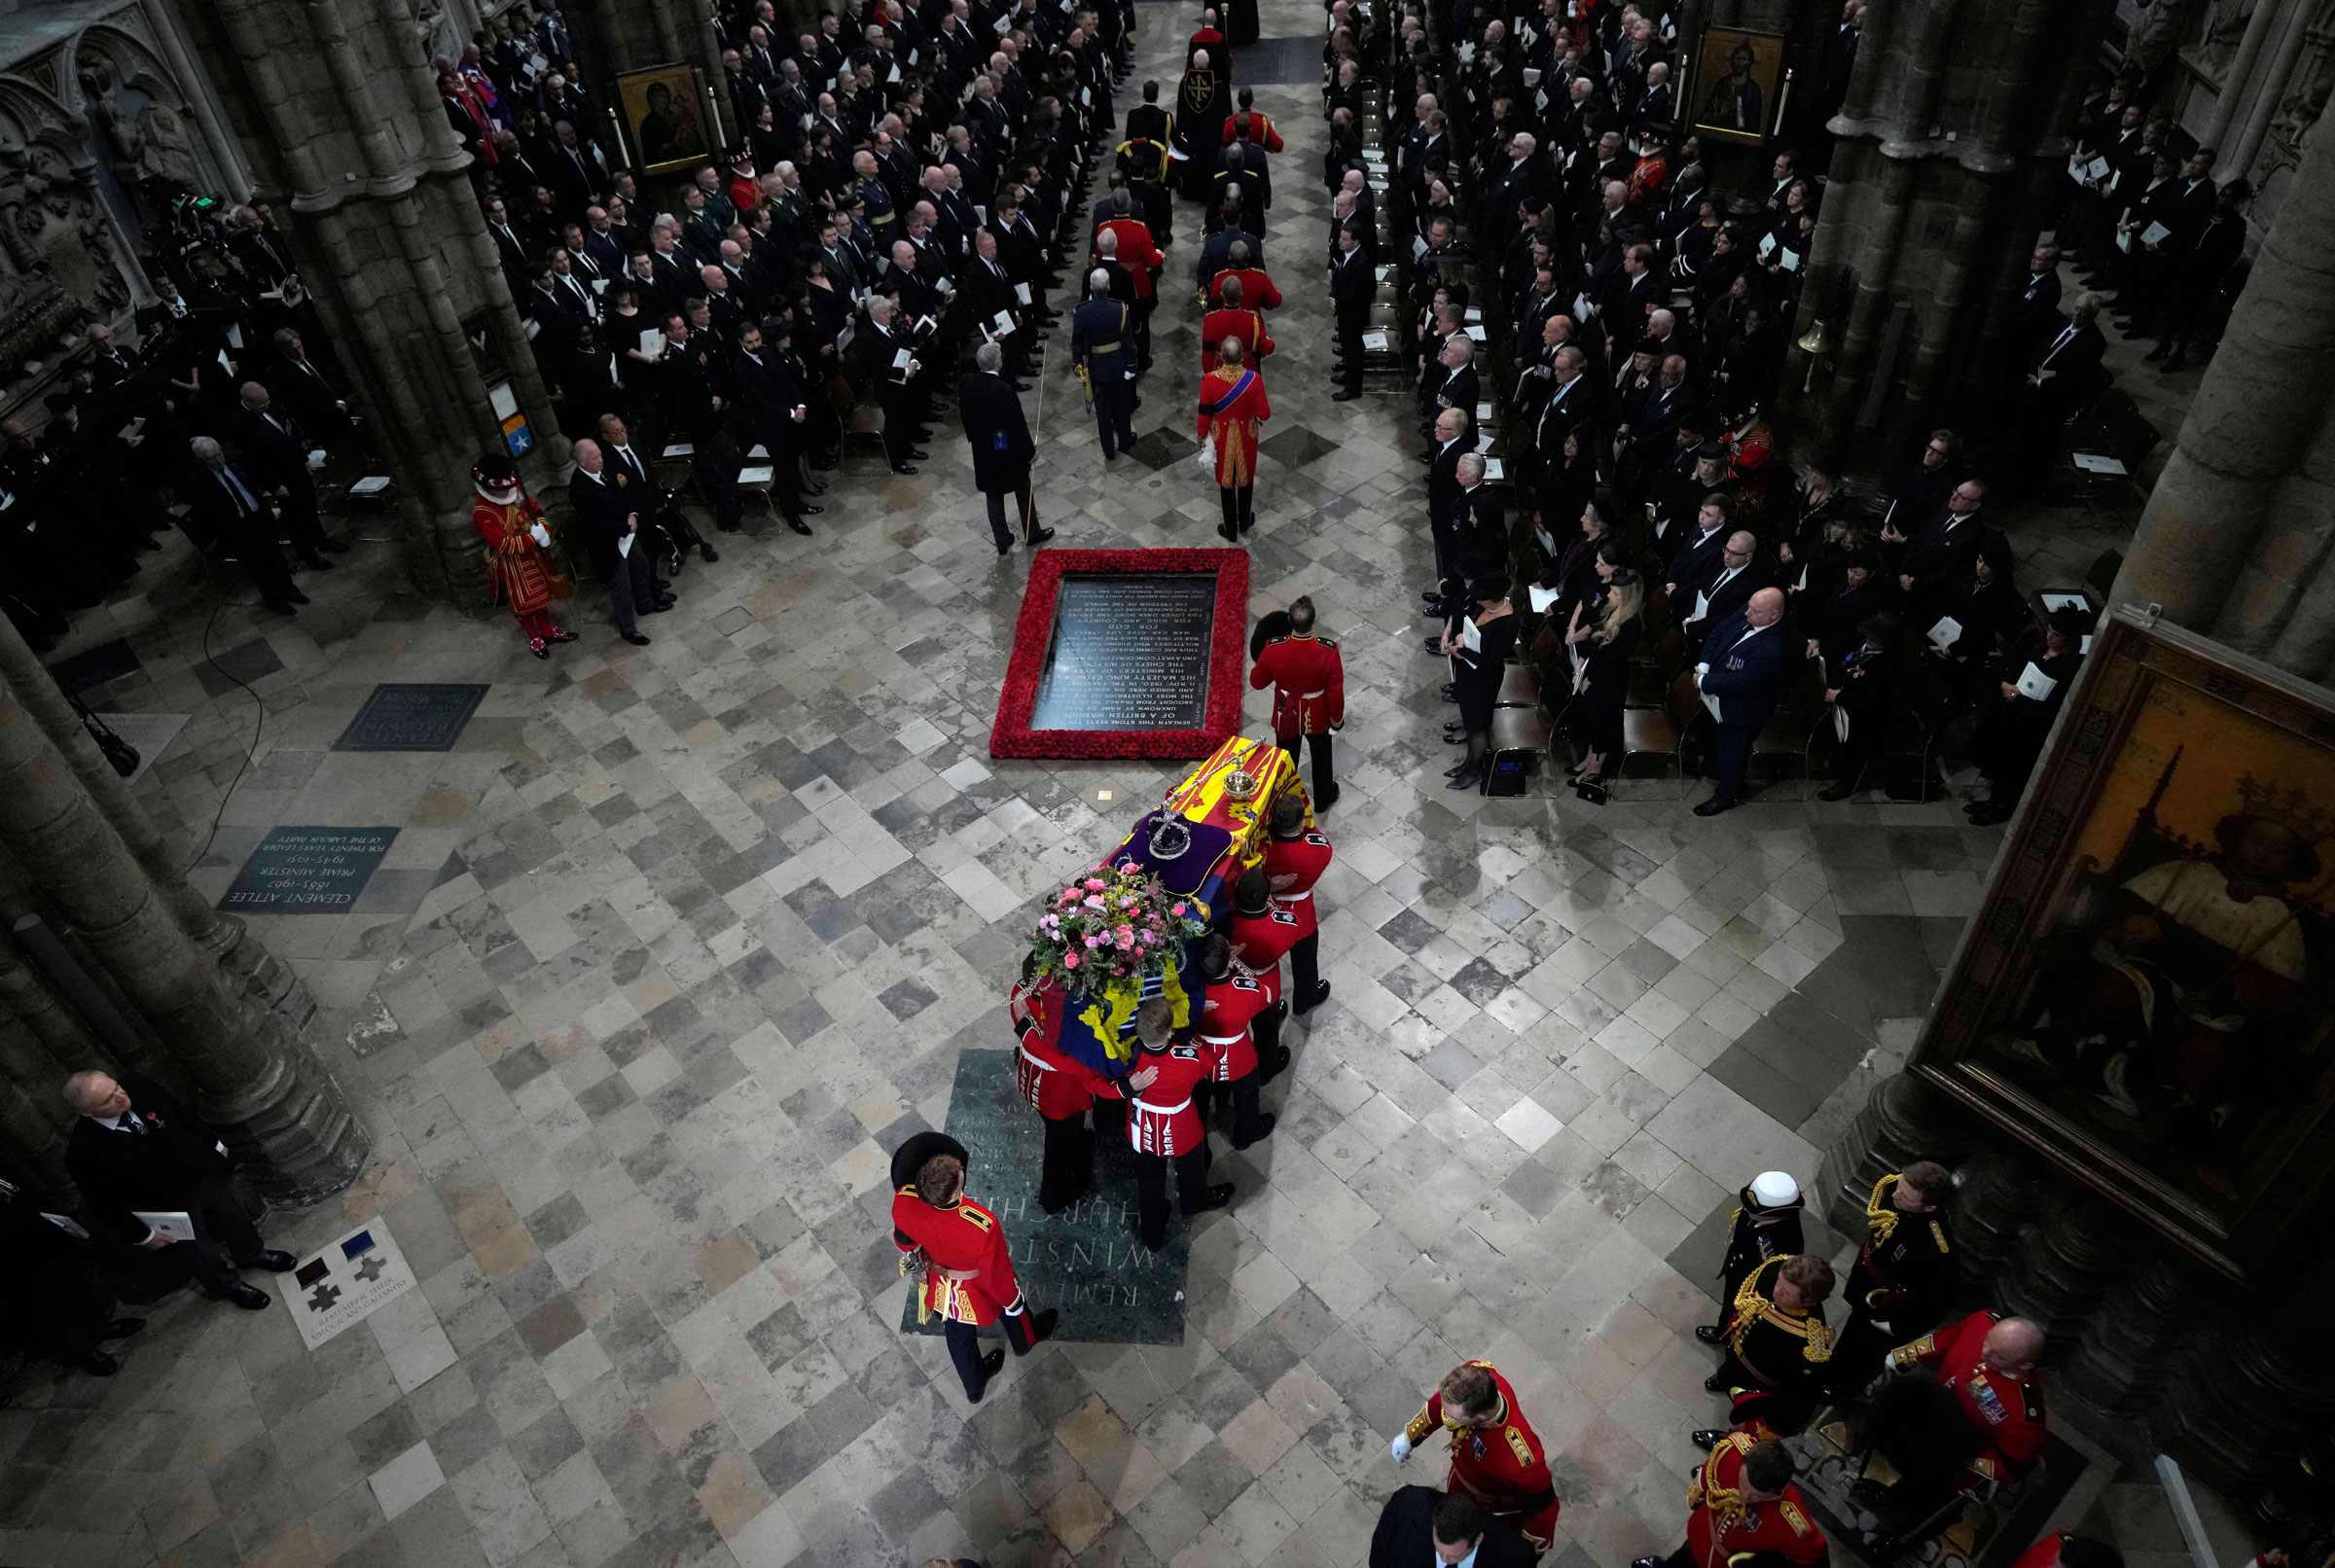 The coffin of Queen Elizabeth II with the imperial state crown resting on top is carried by the bearer party into Westminster Abbey during the State Funeral of Queen Elizabeth II. (Frank Augstein—Pool/AFP/Getty Images)